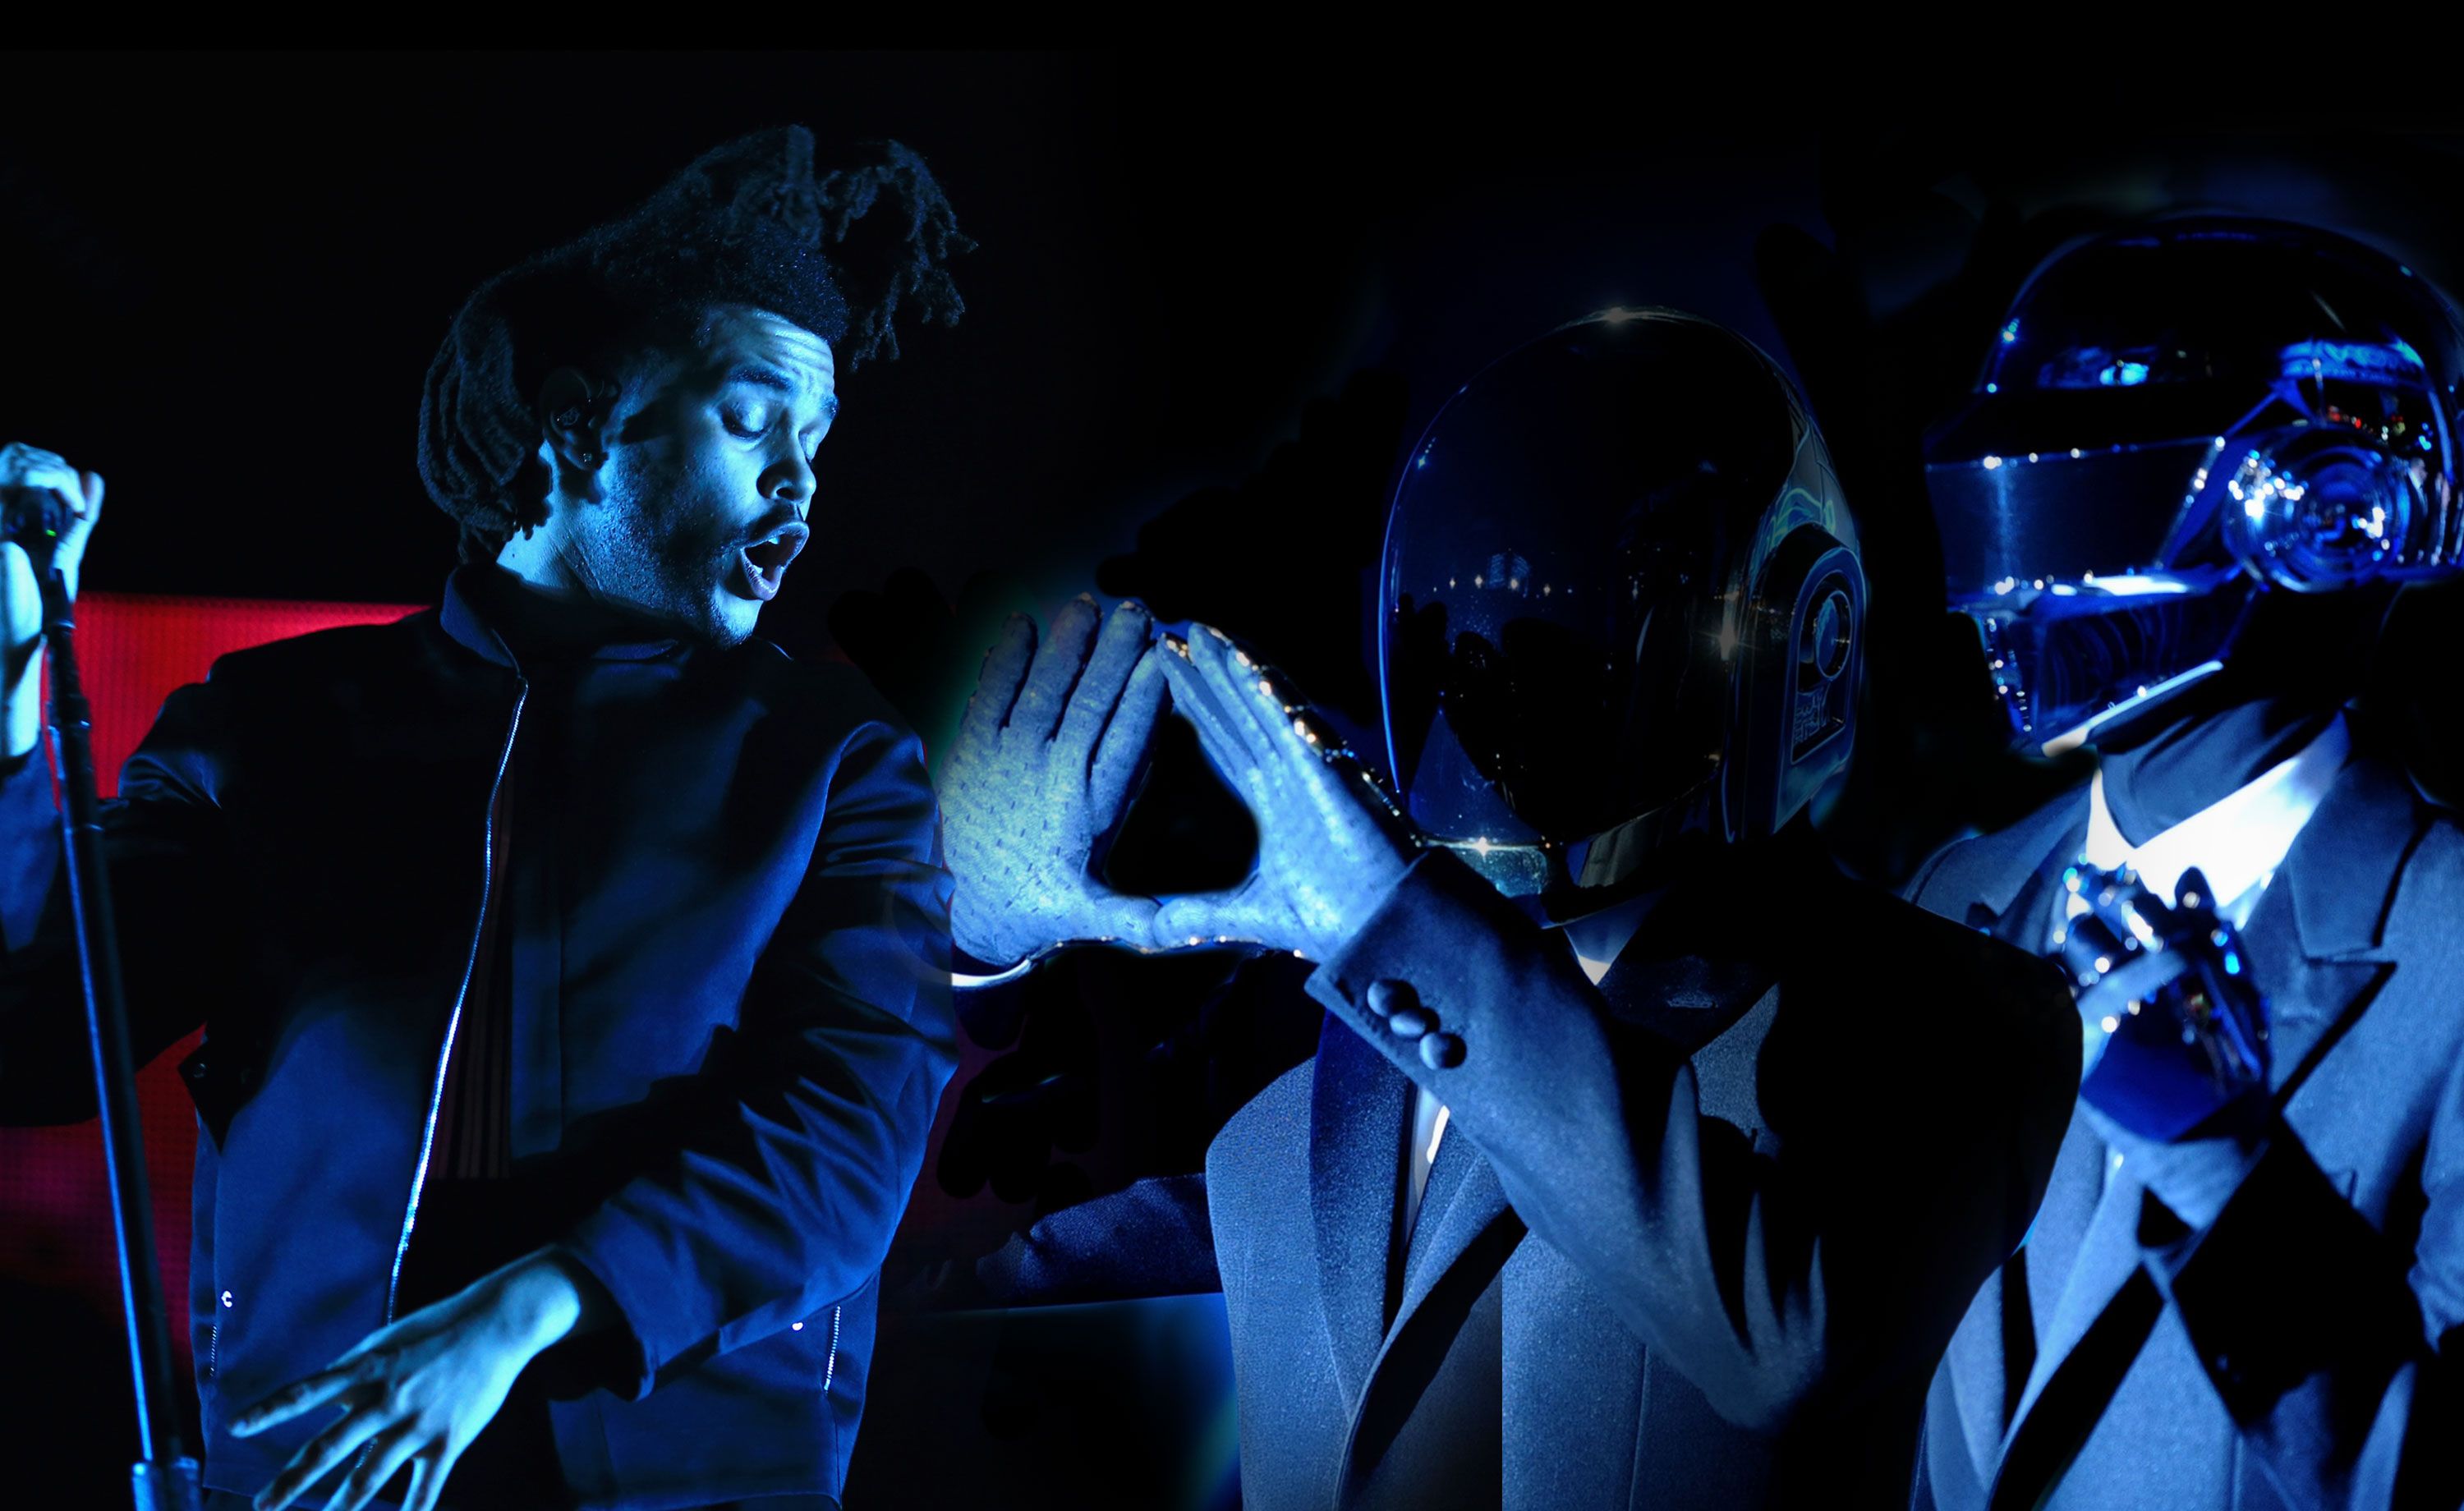 The Weeknd Performs 'Last Feature' - Unless Daft Punk Reunite